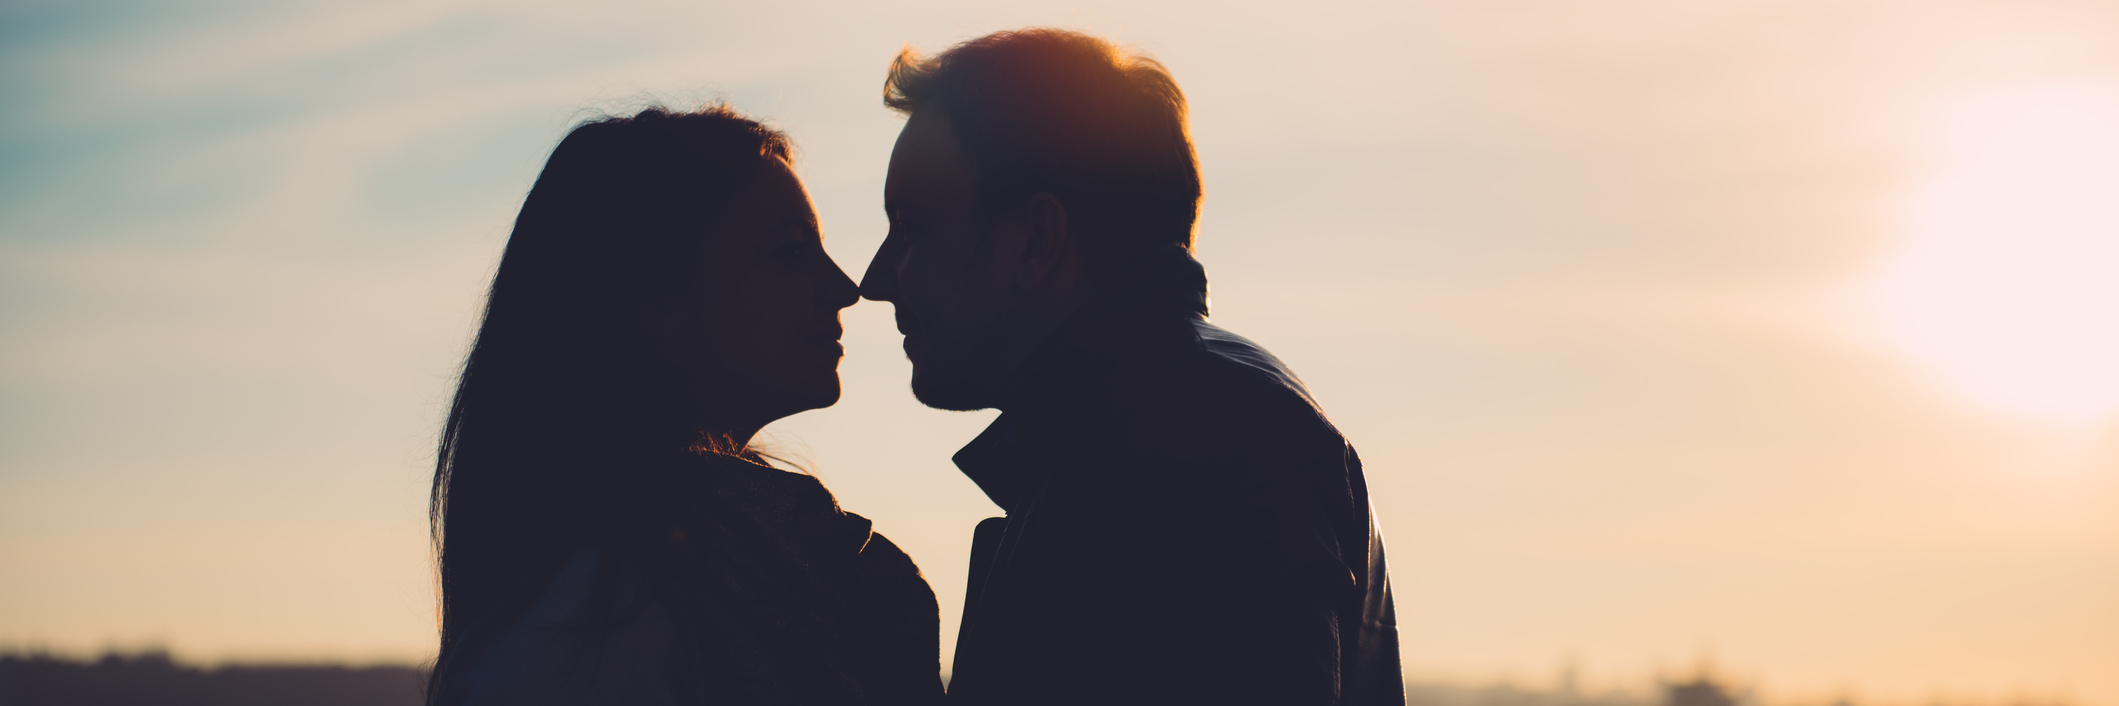 silhouette of a couple looking at each other